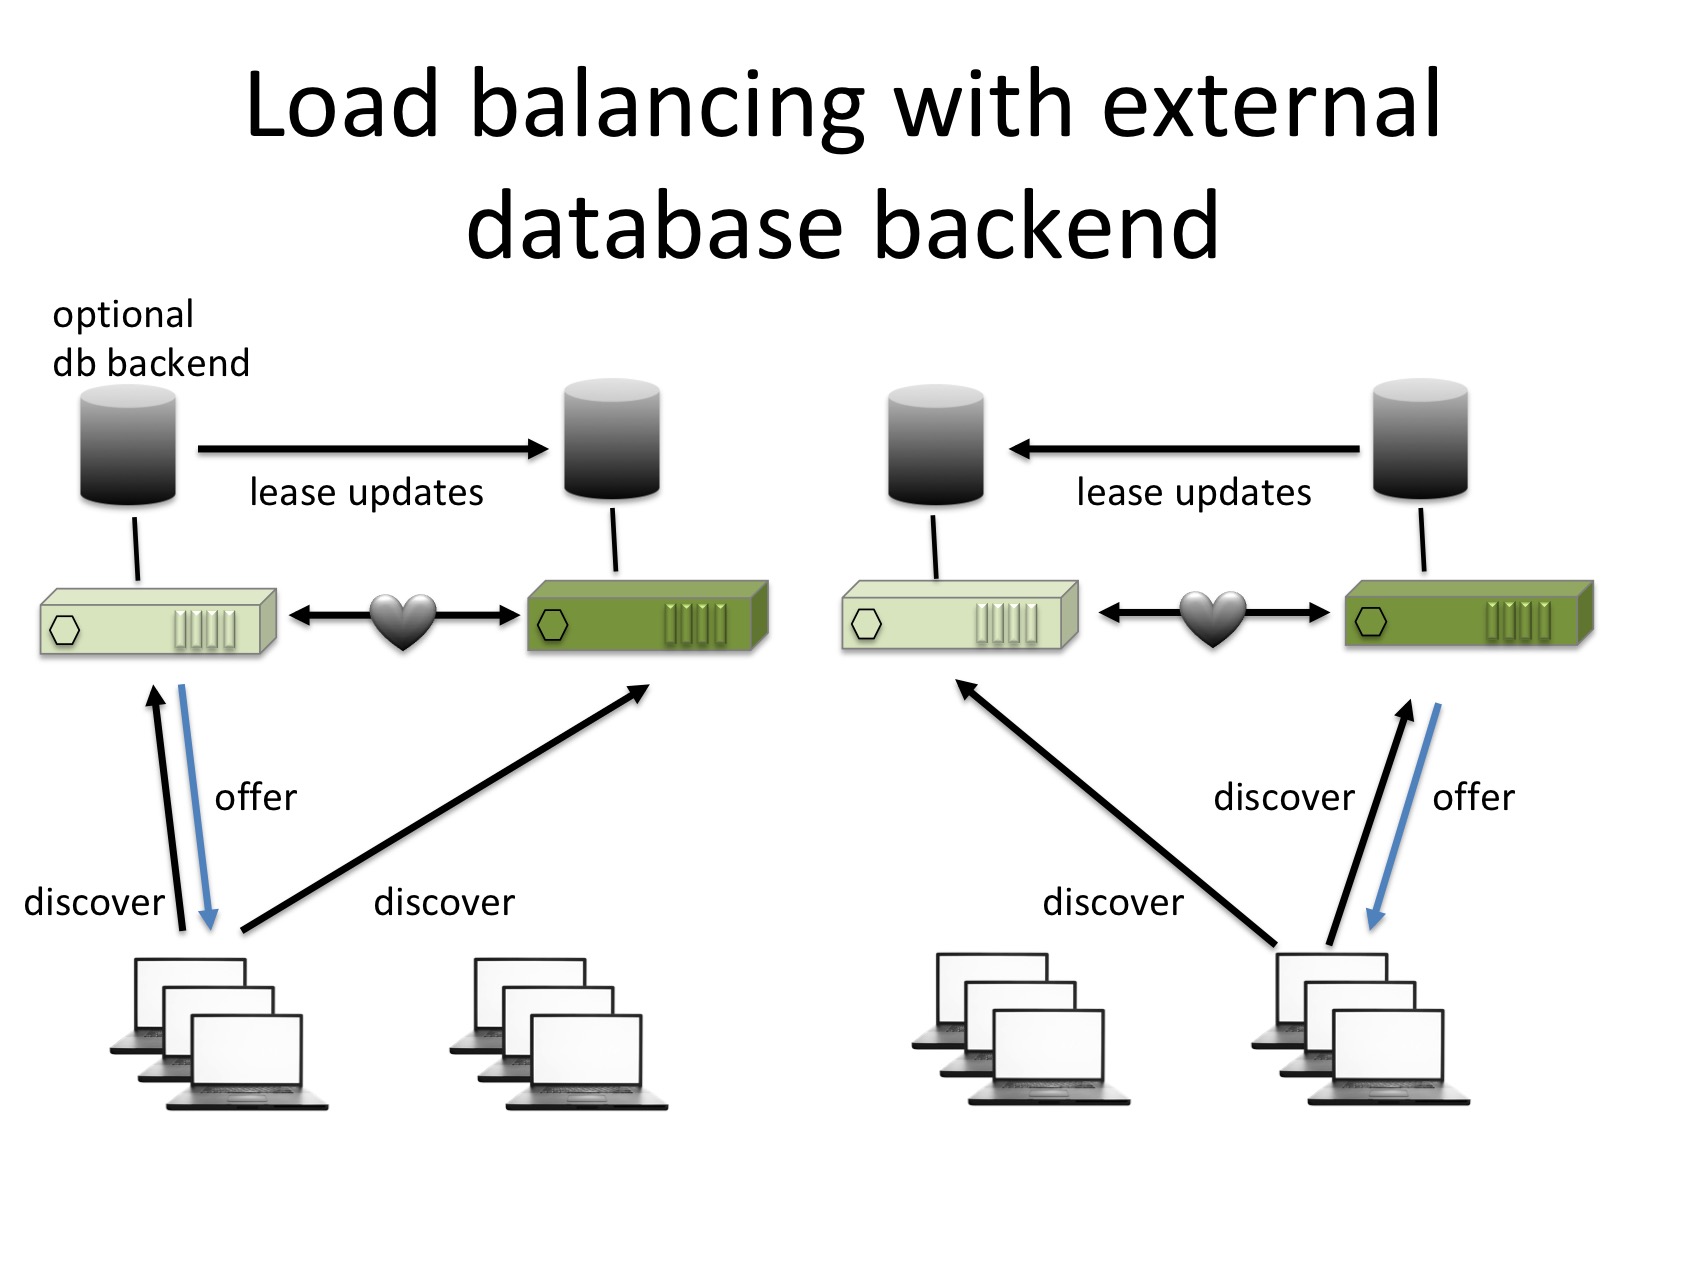 Diagram showing two Kea servers in a load balancing configuration